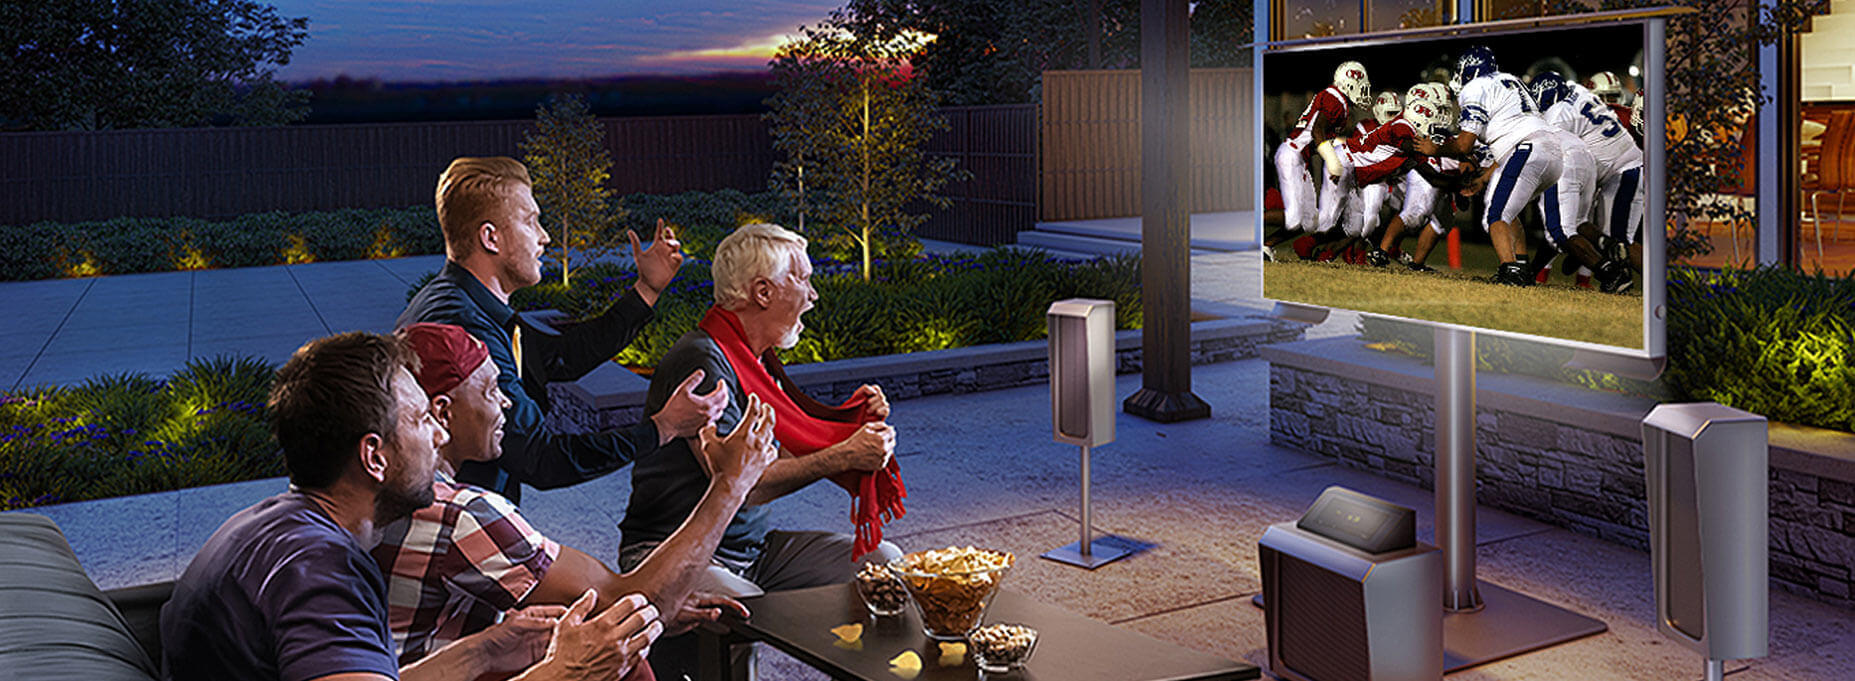 Group of men in a patio watching an American football in a cool looking outdoor TV with its speakers and subwoofers.